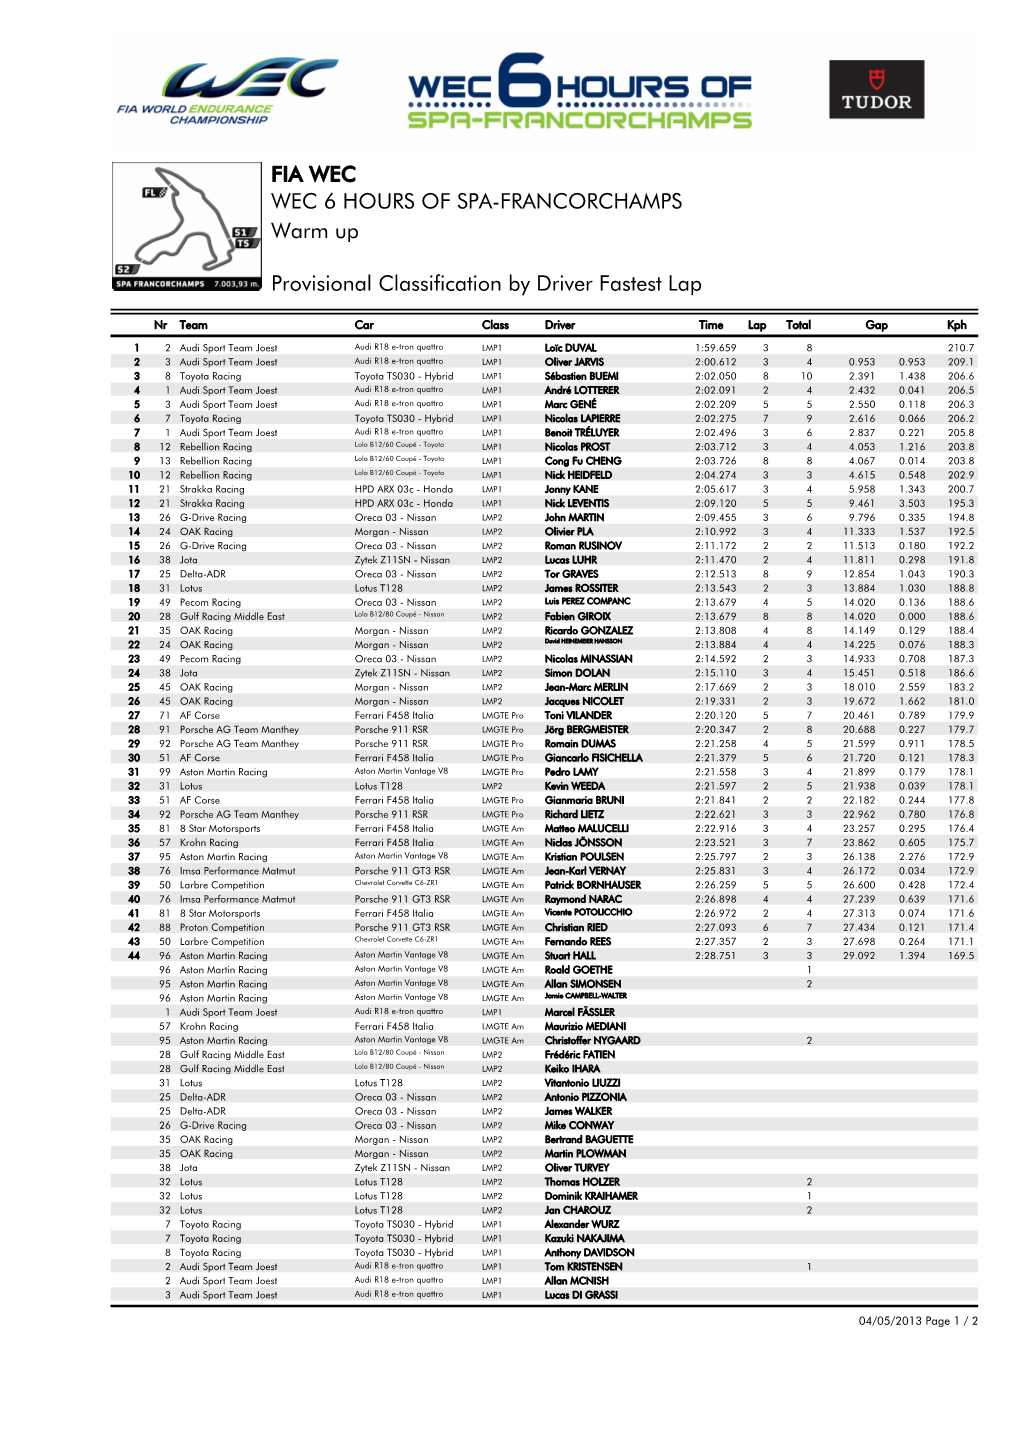 Provisional Classification by Driver Fastest Lap Warm